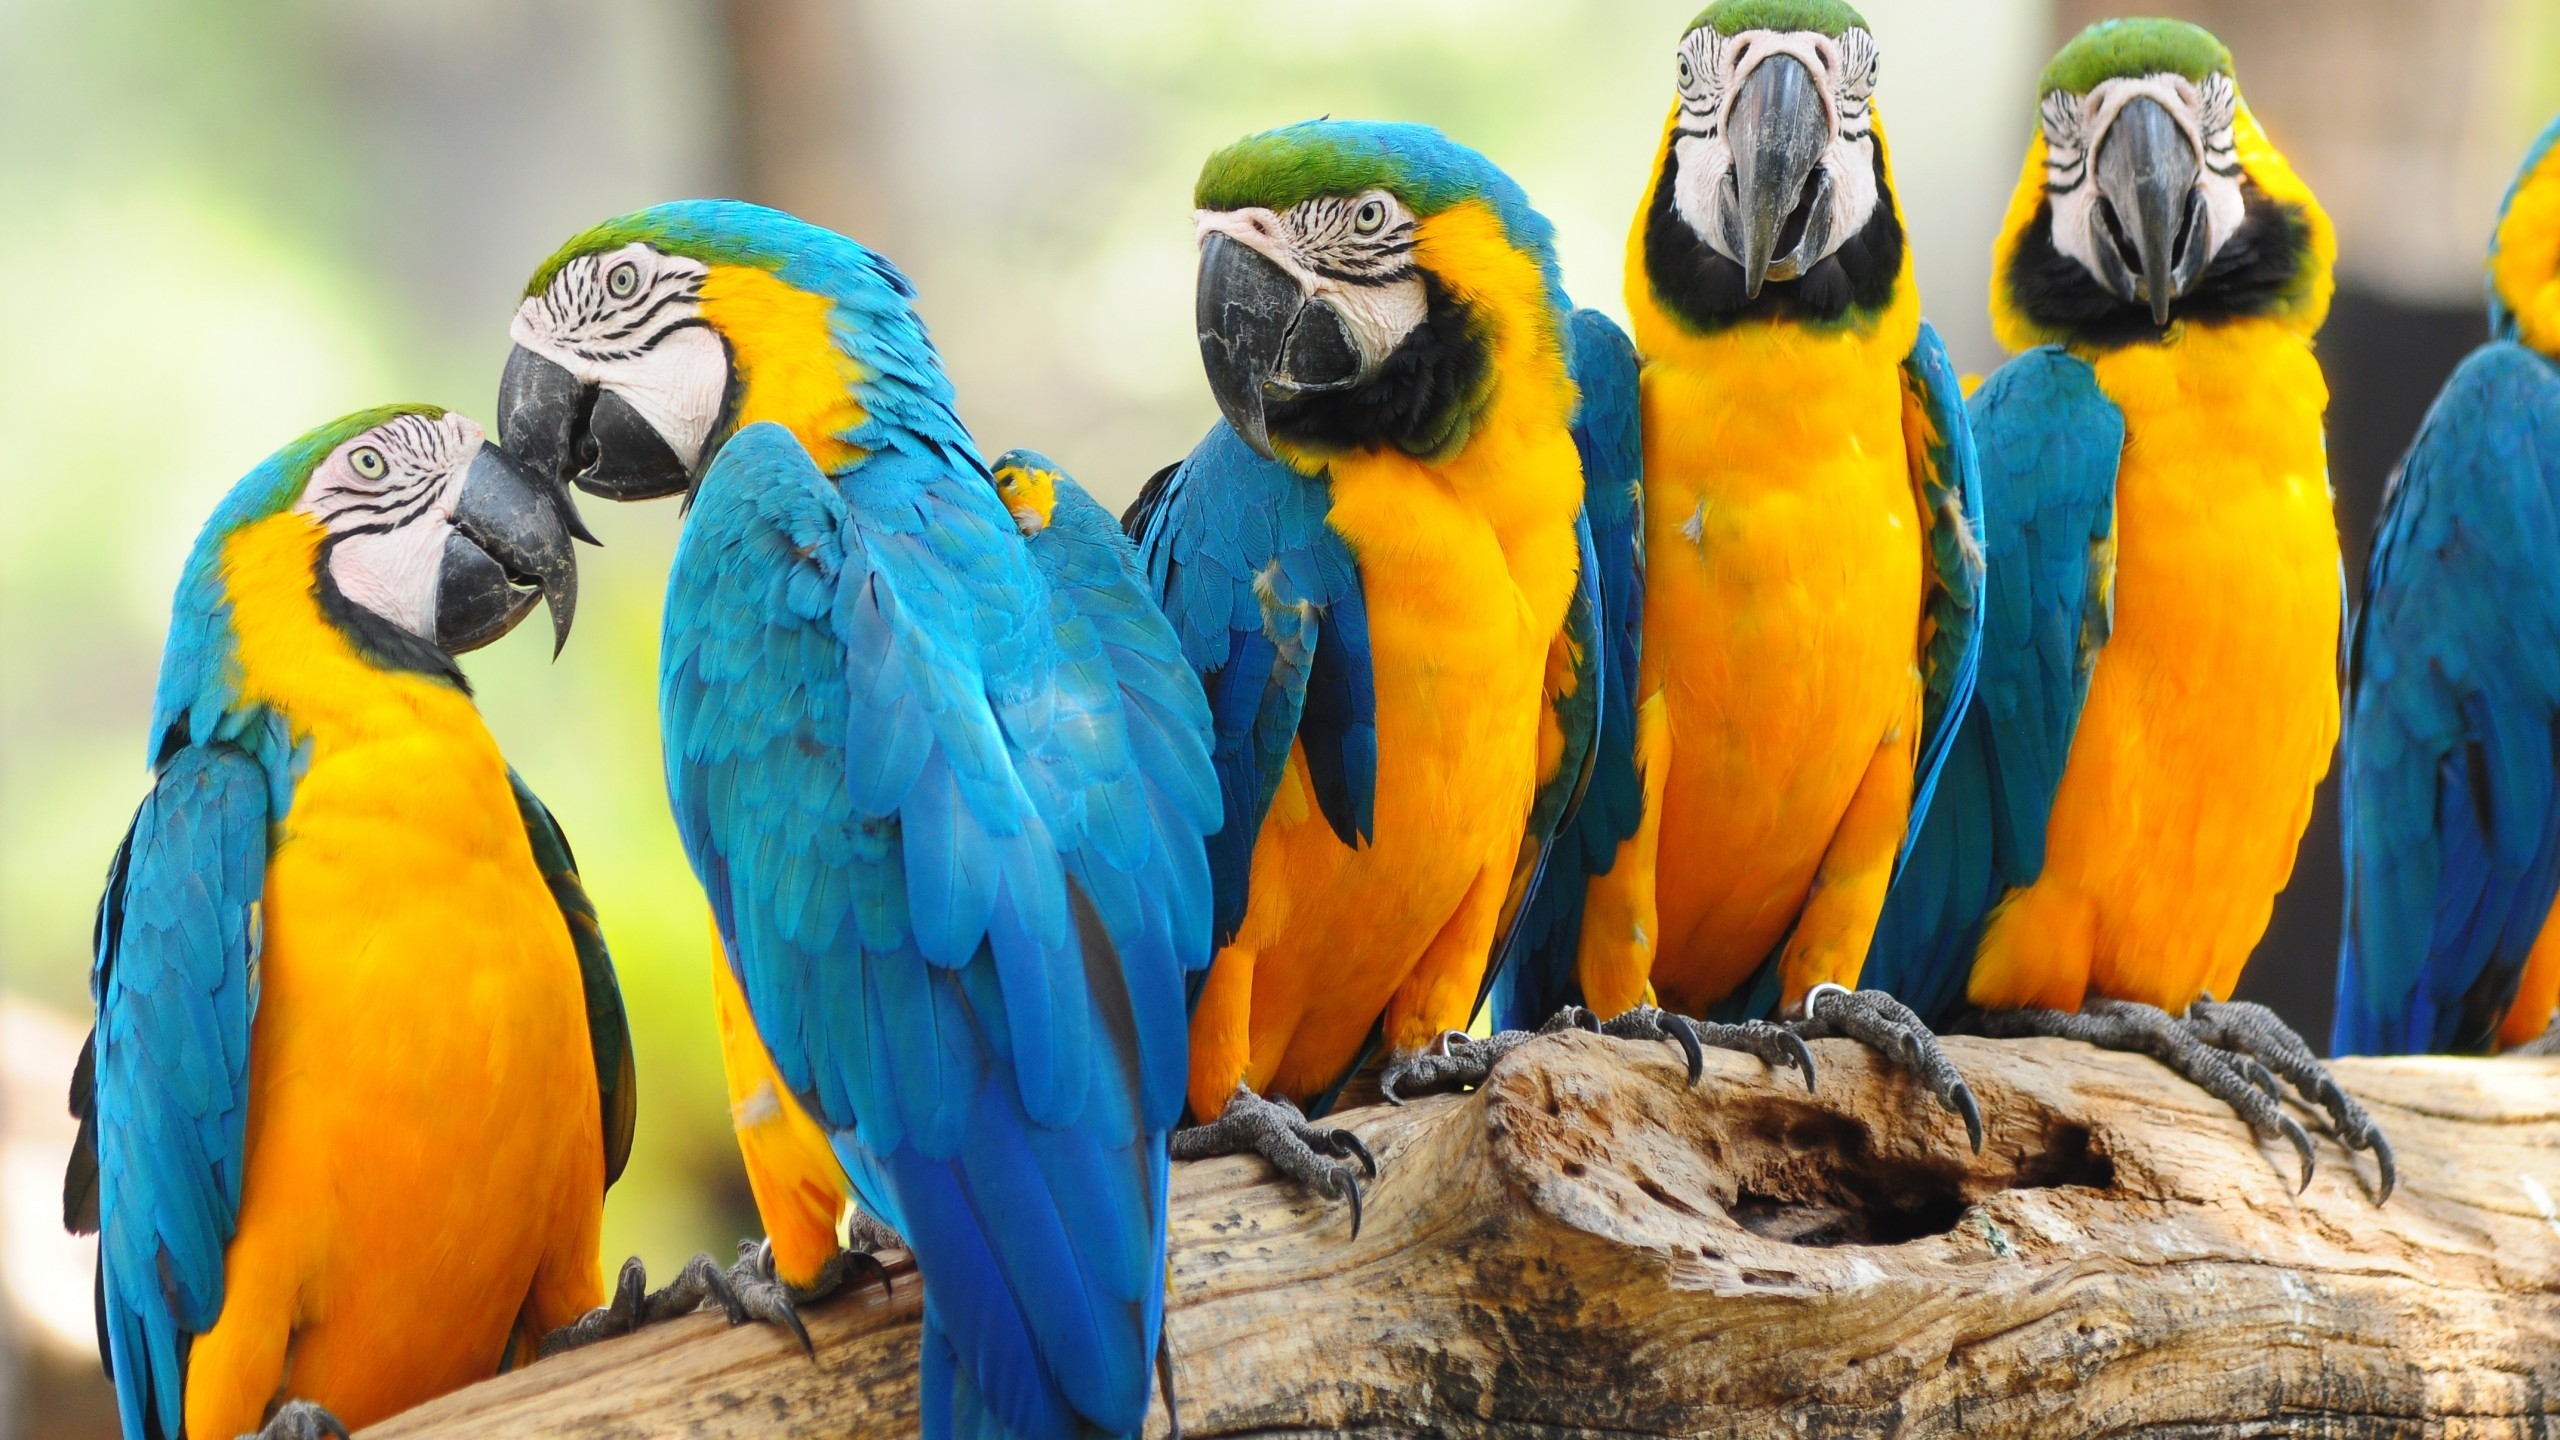 Cool Parrots for 2560x1440 HDTV resolution